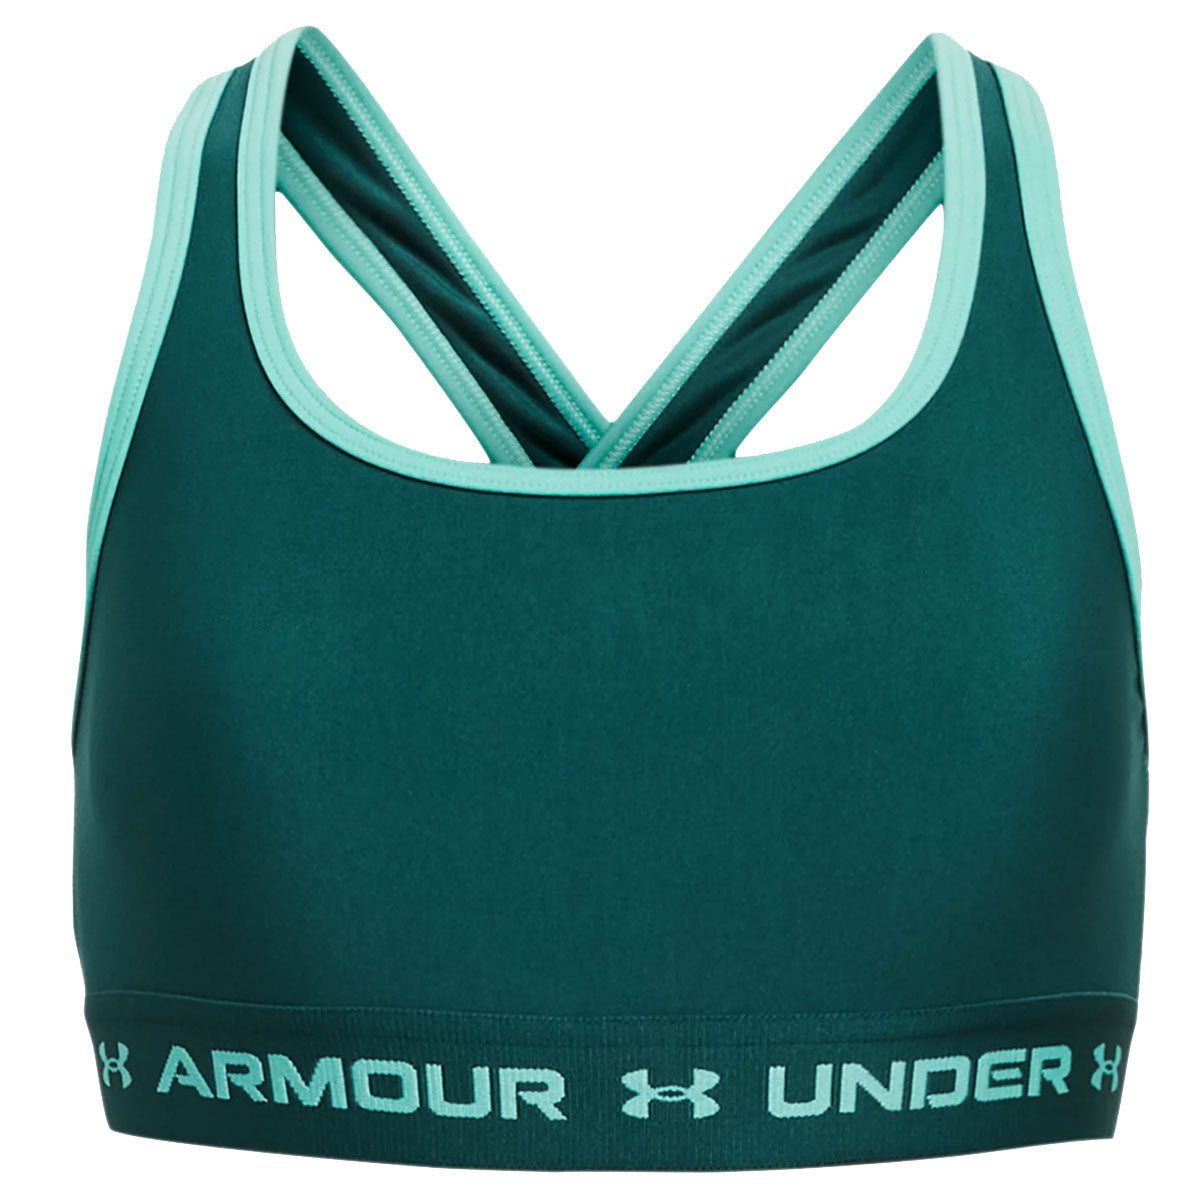 Under Armour Crossback Sports Bra - Girls - Hydro Teal/Radial Turquoise